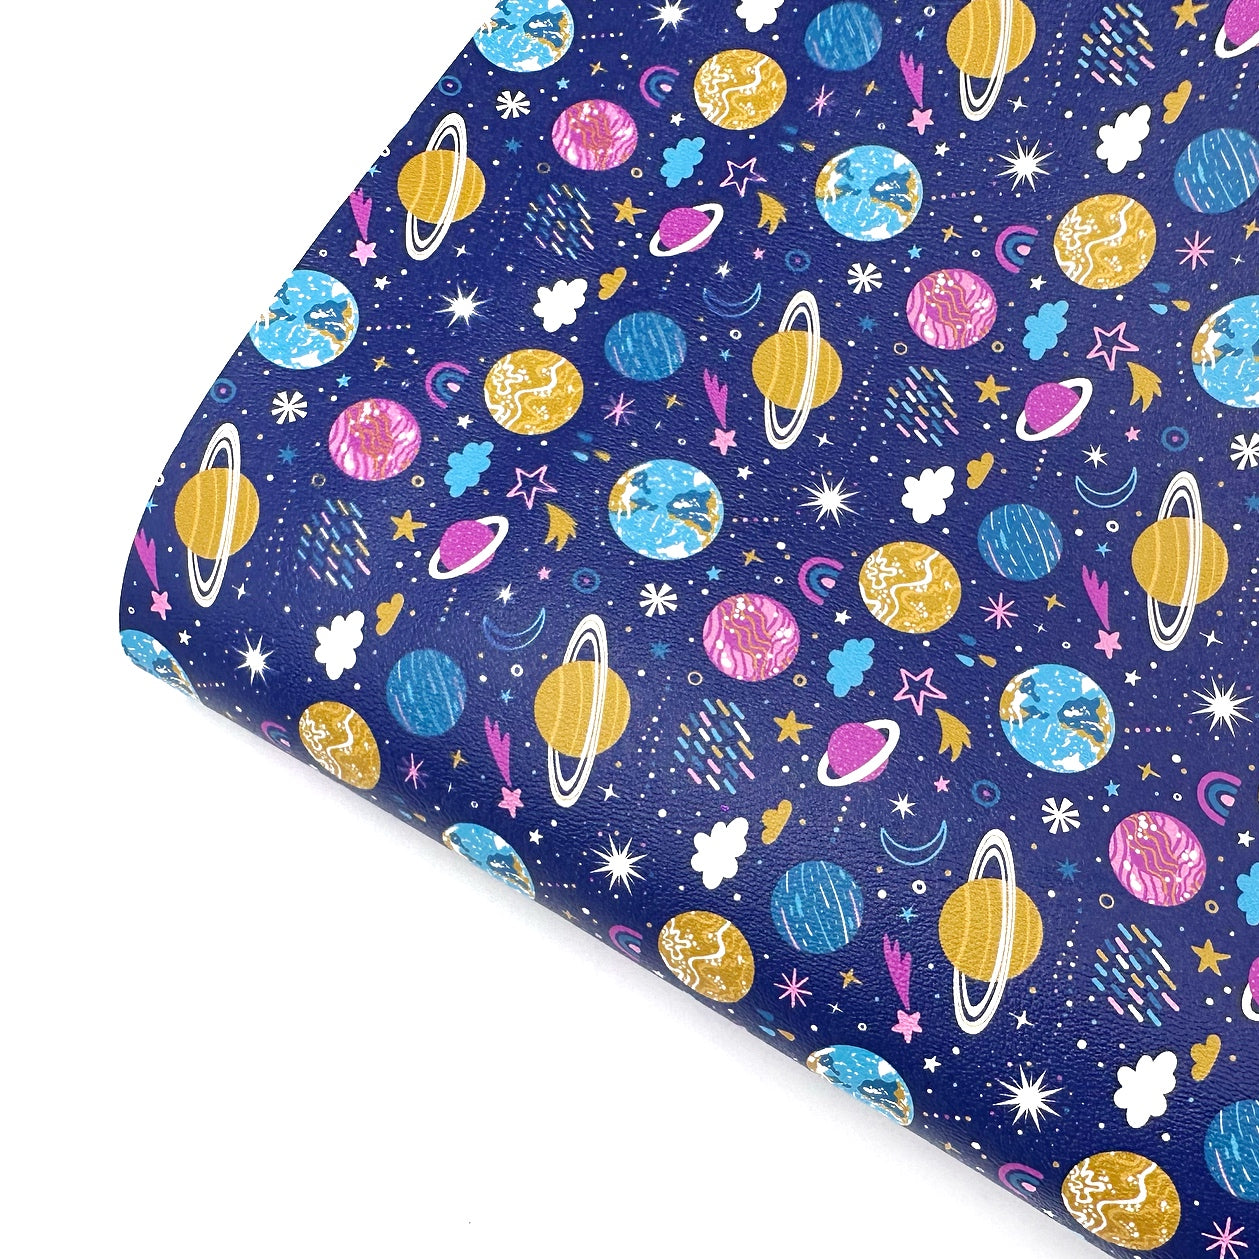 Into Space Premium Faux Leather Fabric Sheets